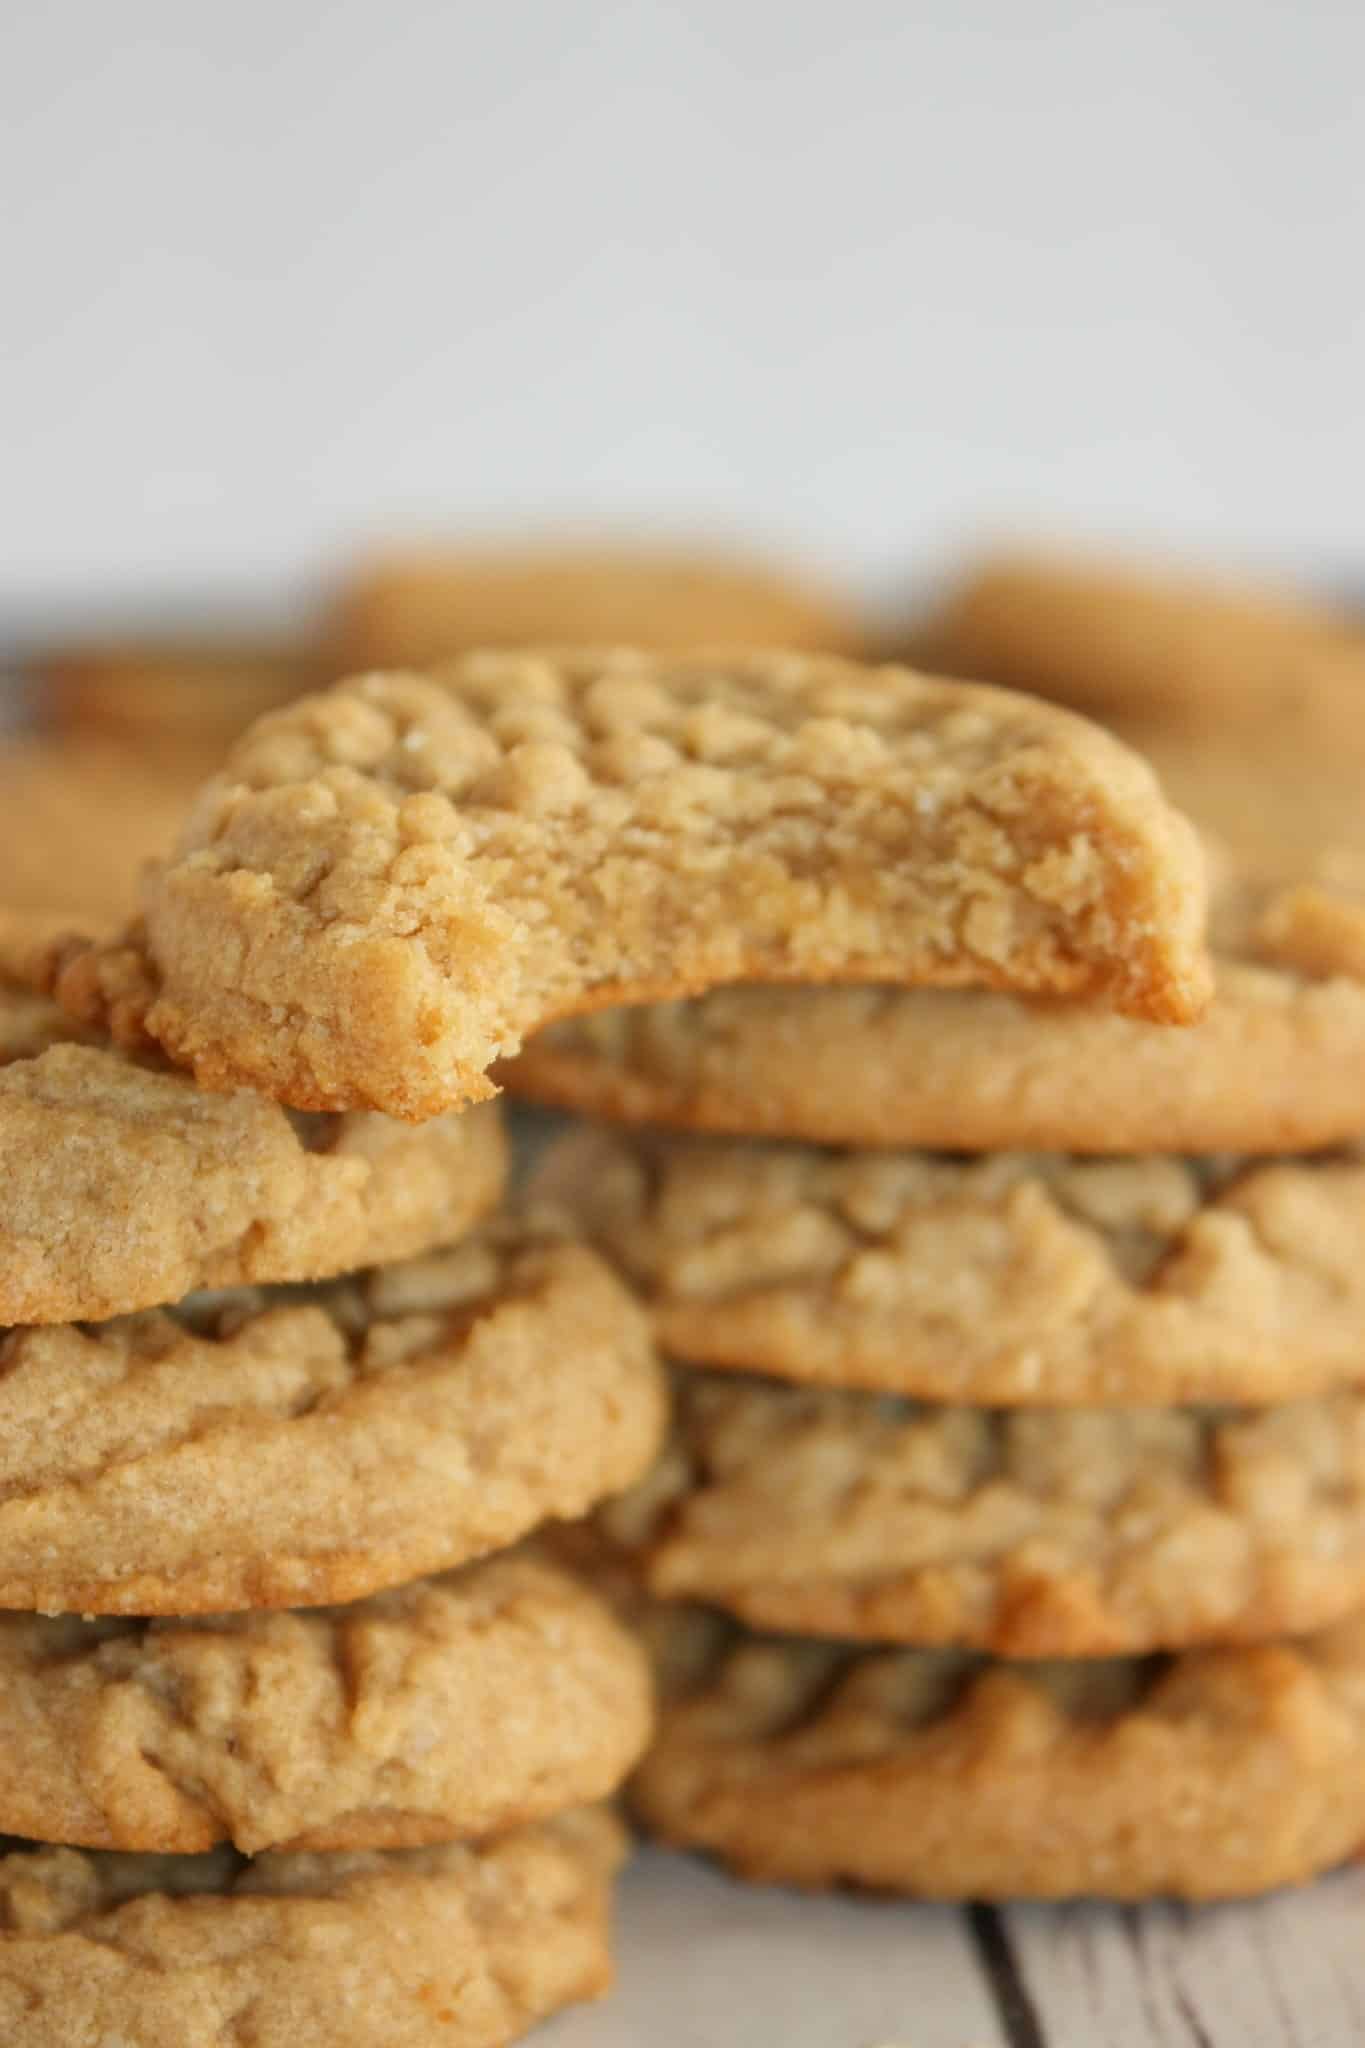 Looking for a quick and easy cookie recipe?  These gluten free Almond Flour Peanut Butter Cookies only use 4 ingredients and really hit the spot!